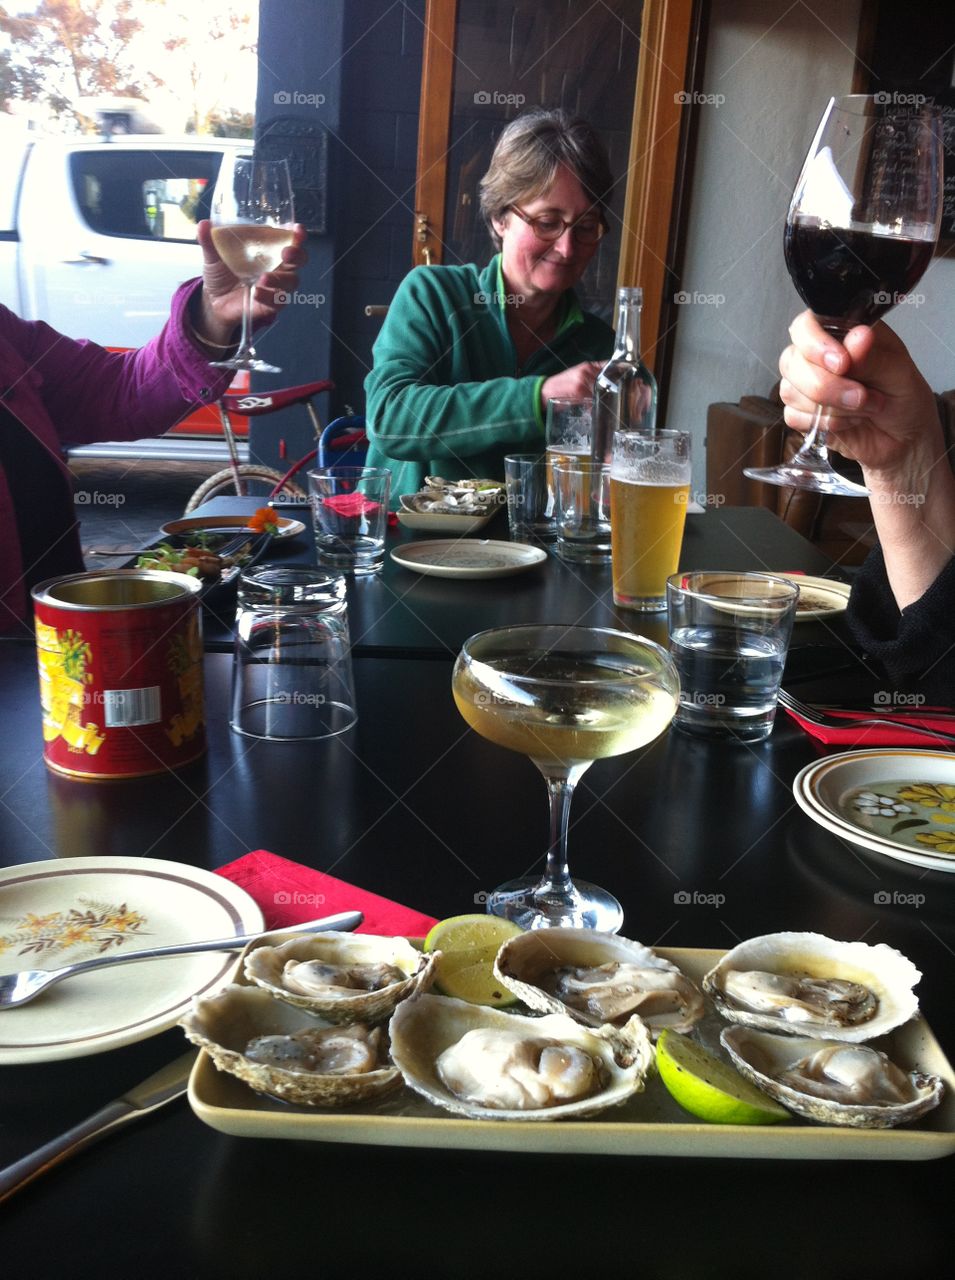 Oyster meal. With friends in Wellington , NZ
